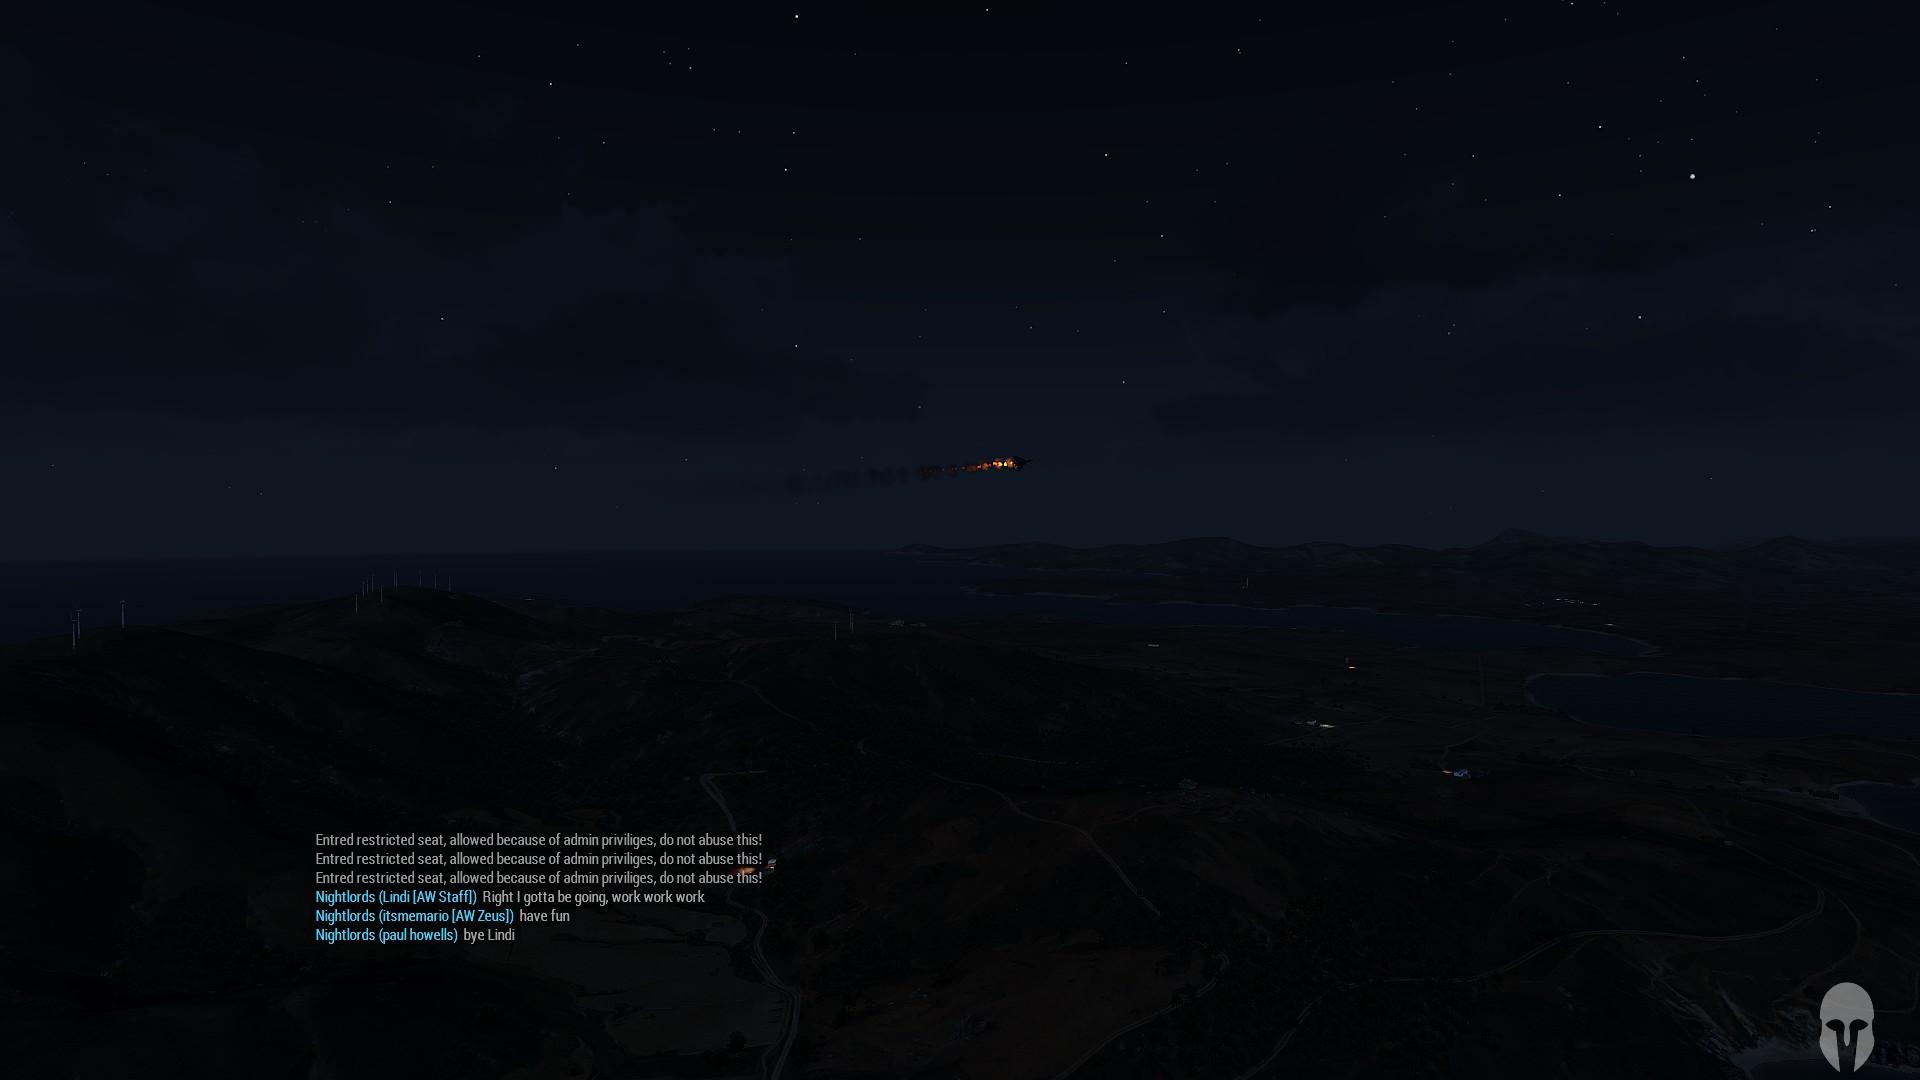 Shooting star sighted over Altis